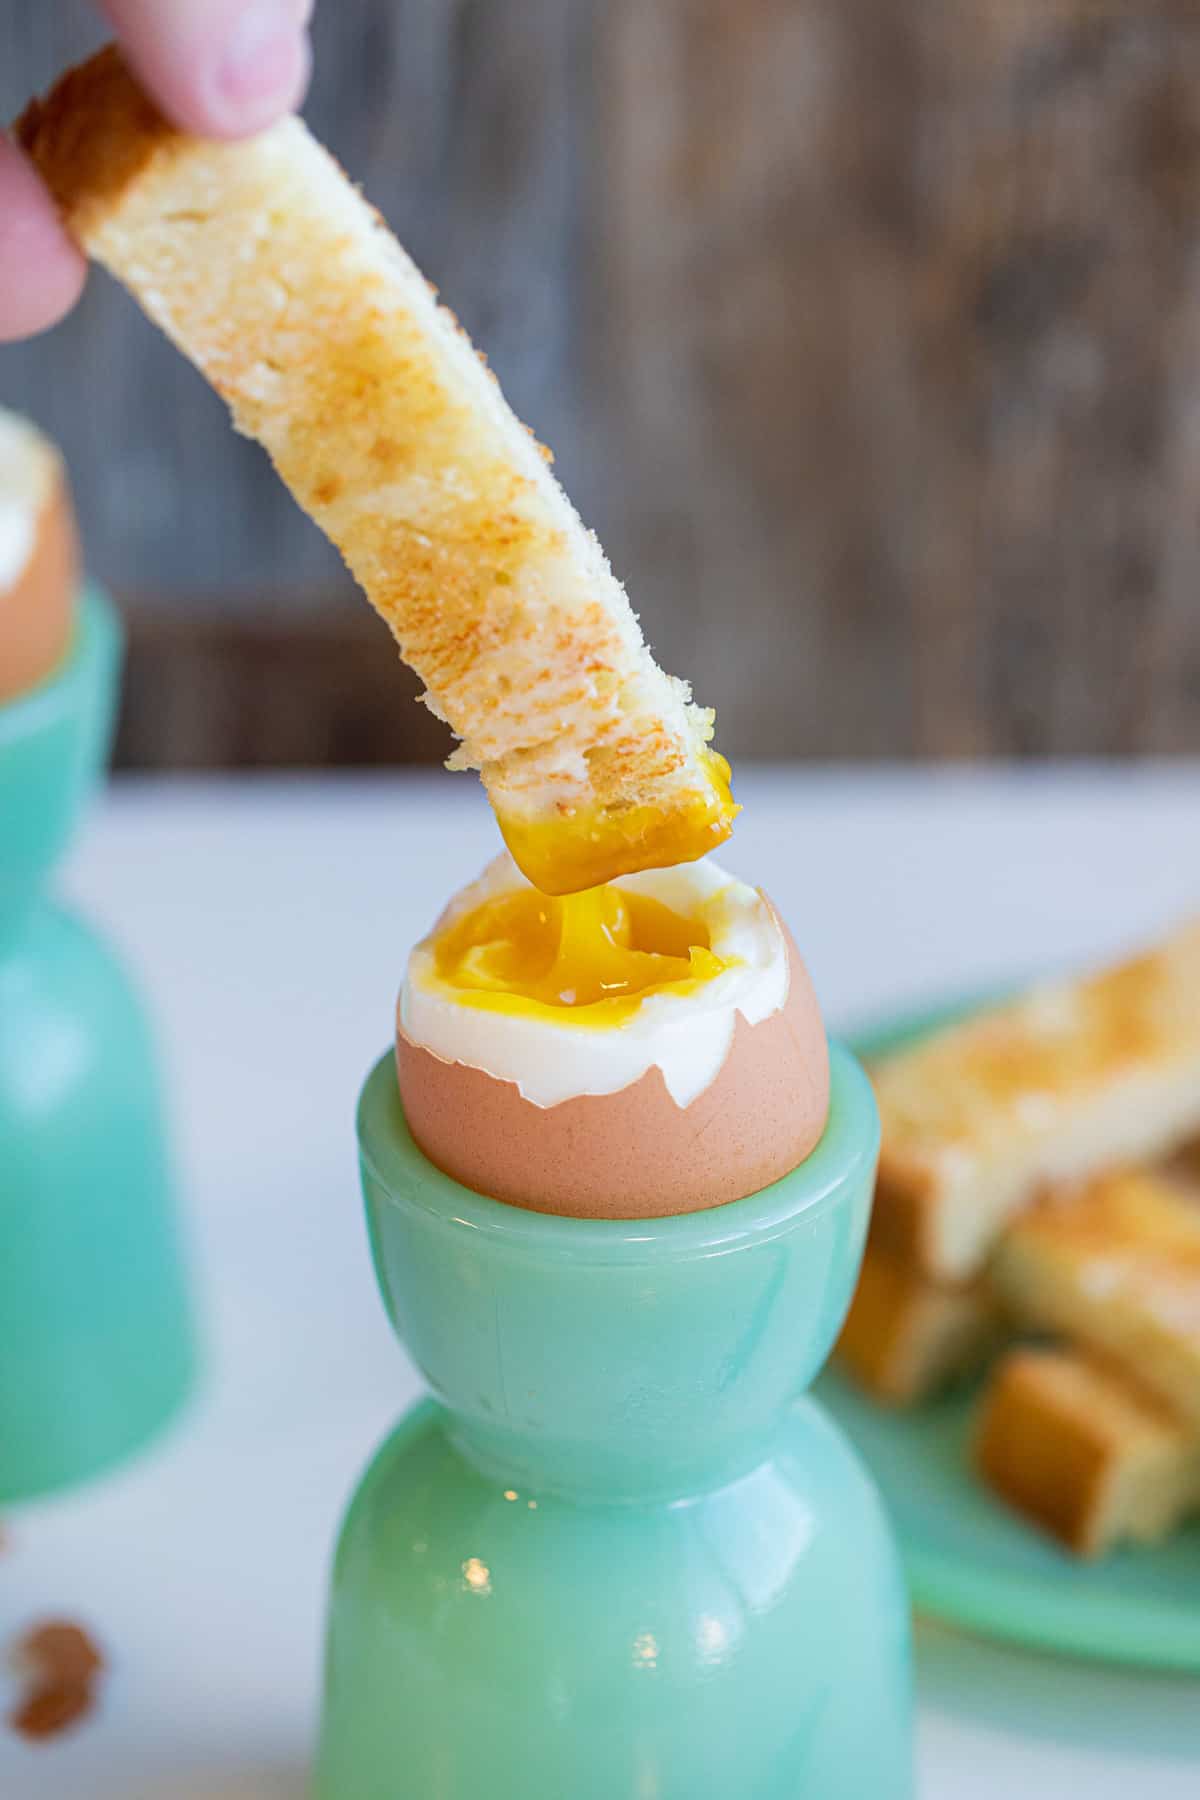 A close-up of a toast soldier being dipped into a soft boiled egg yolk